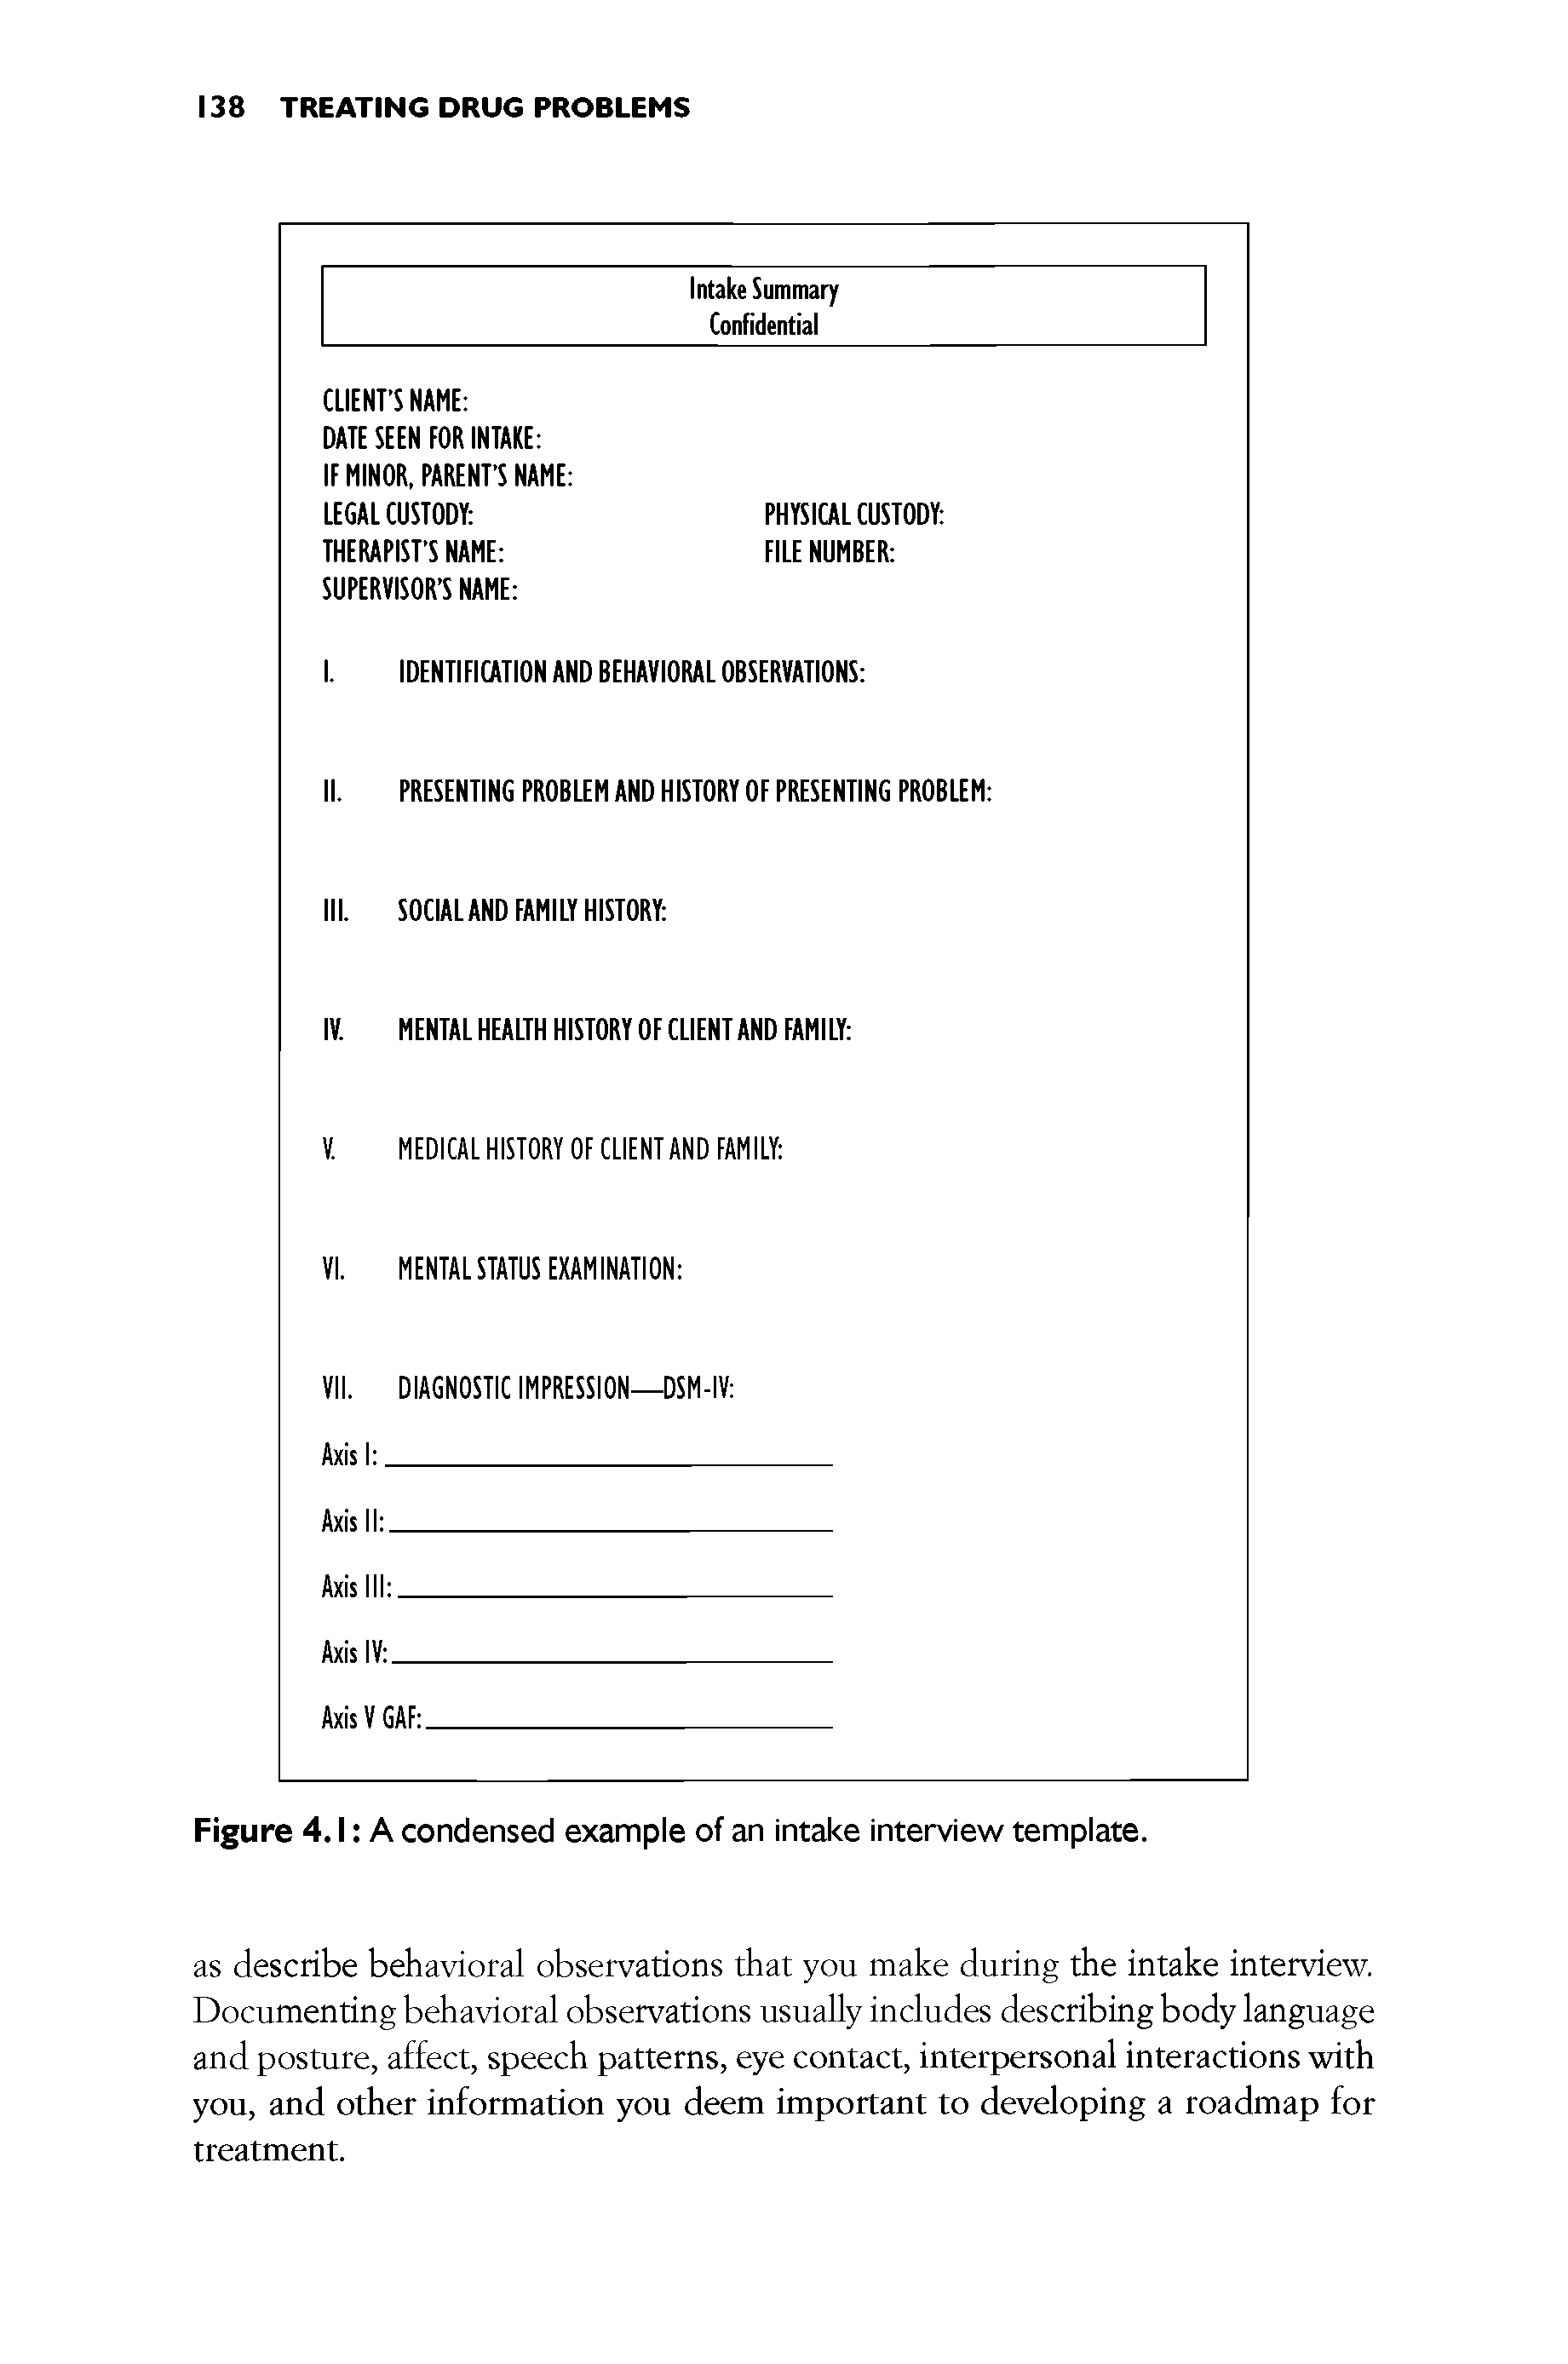 Figure 4.1 A condensed example of an intake interview template.